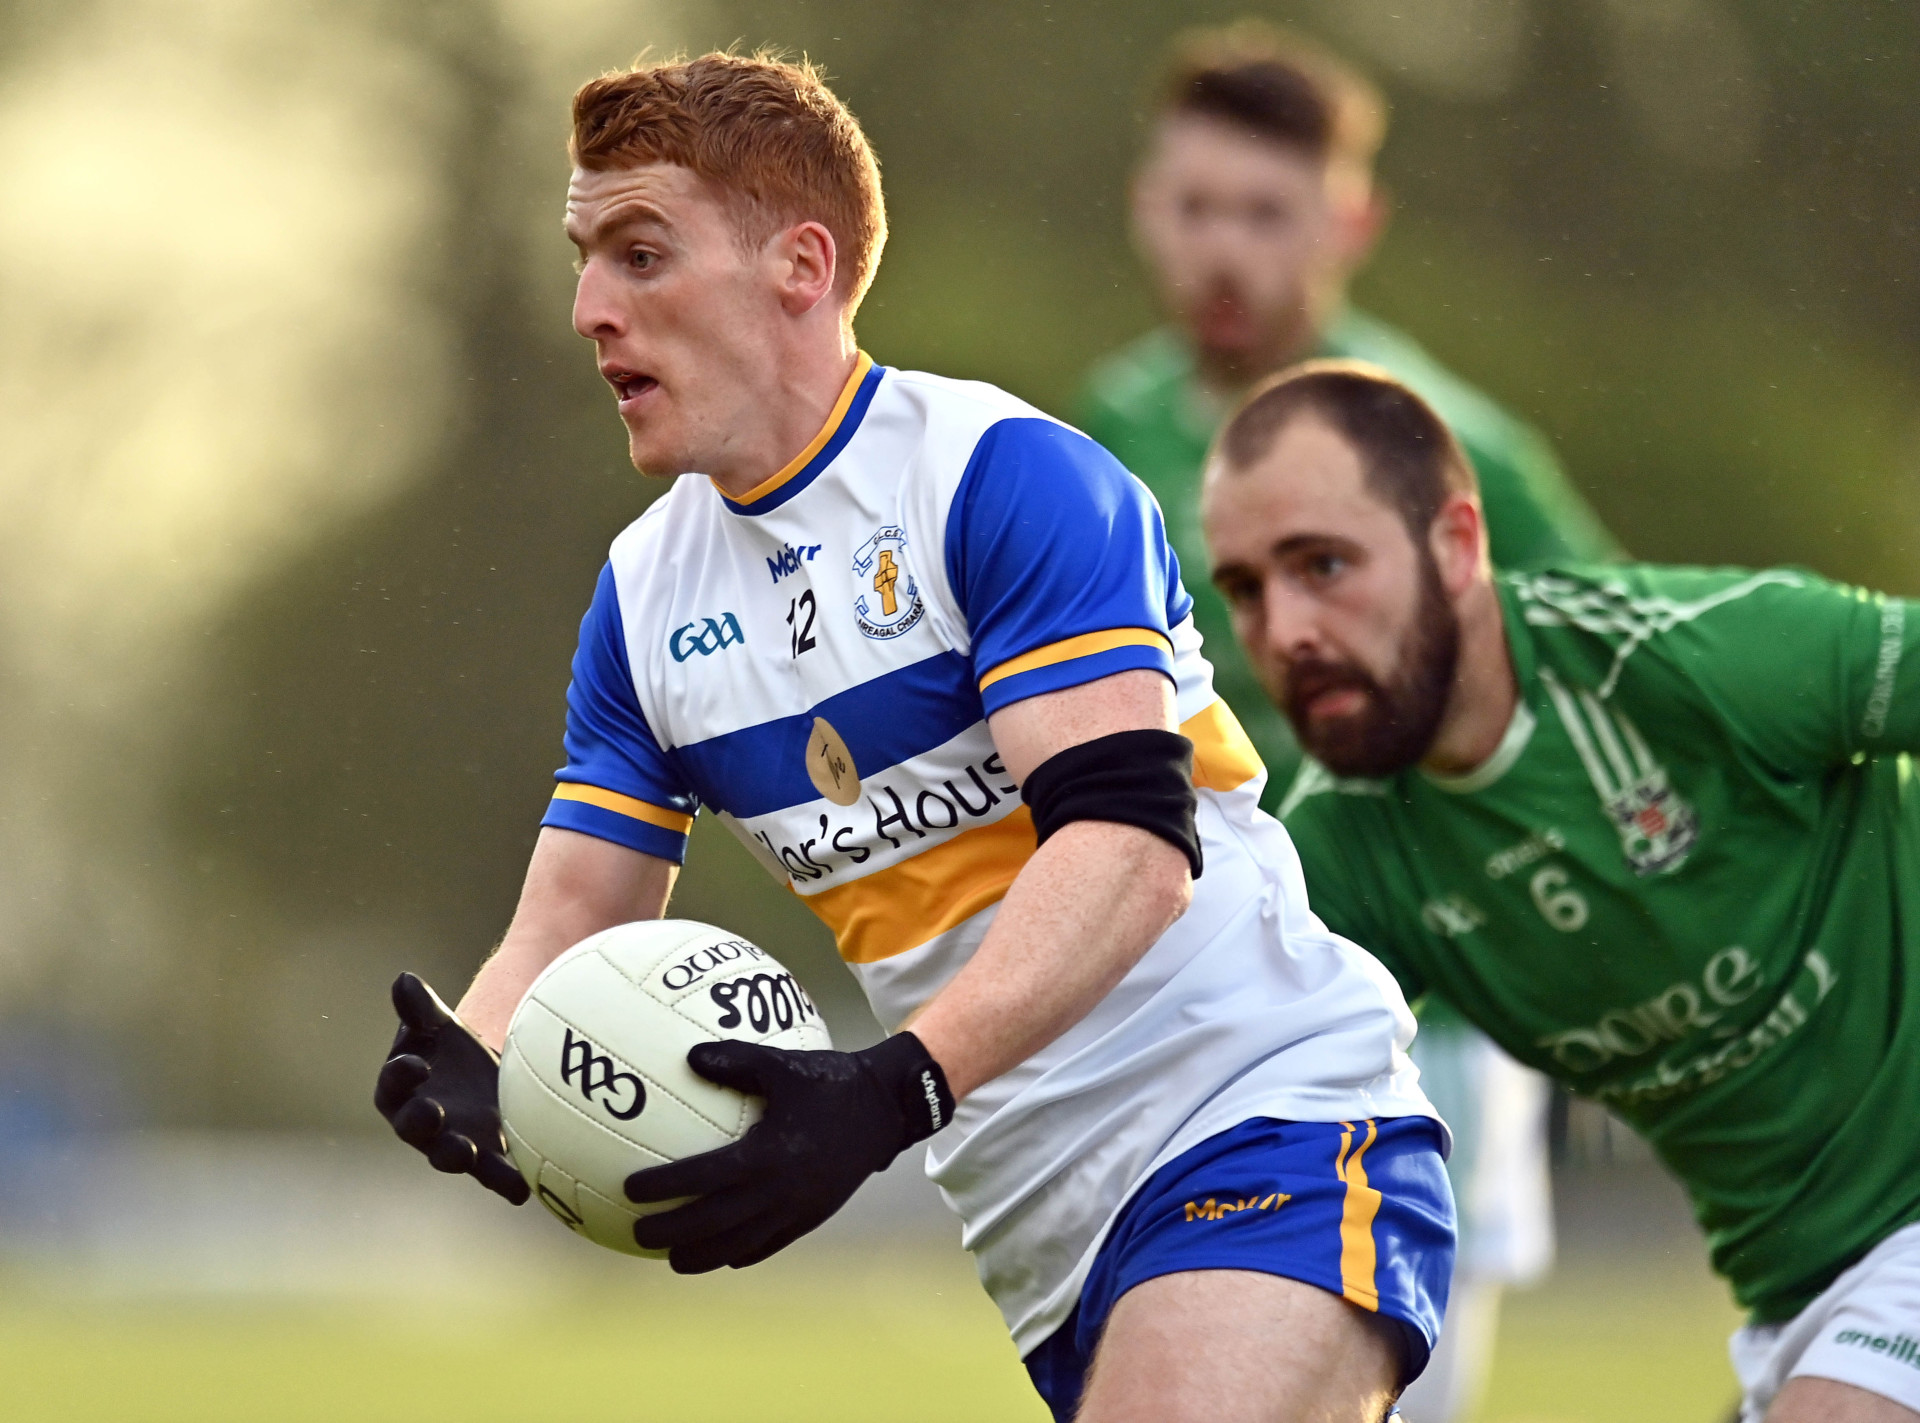 Errigal glad to welcome back their big hitters